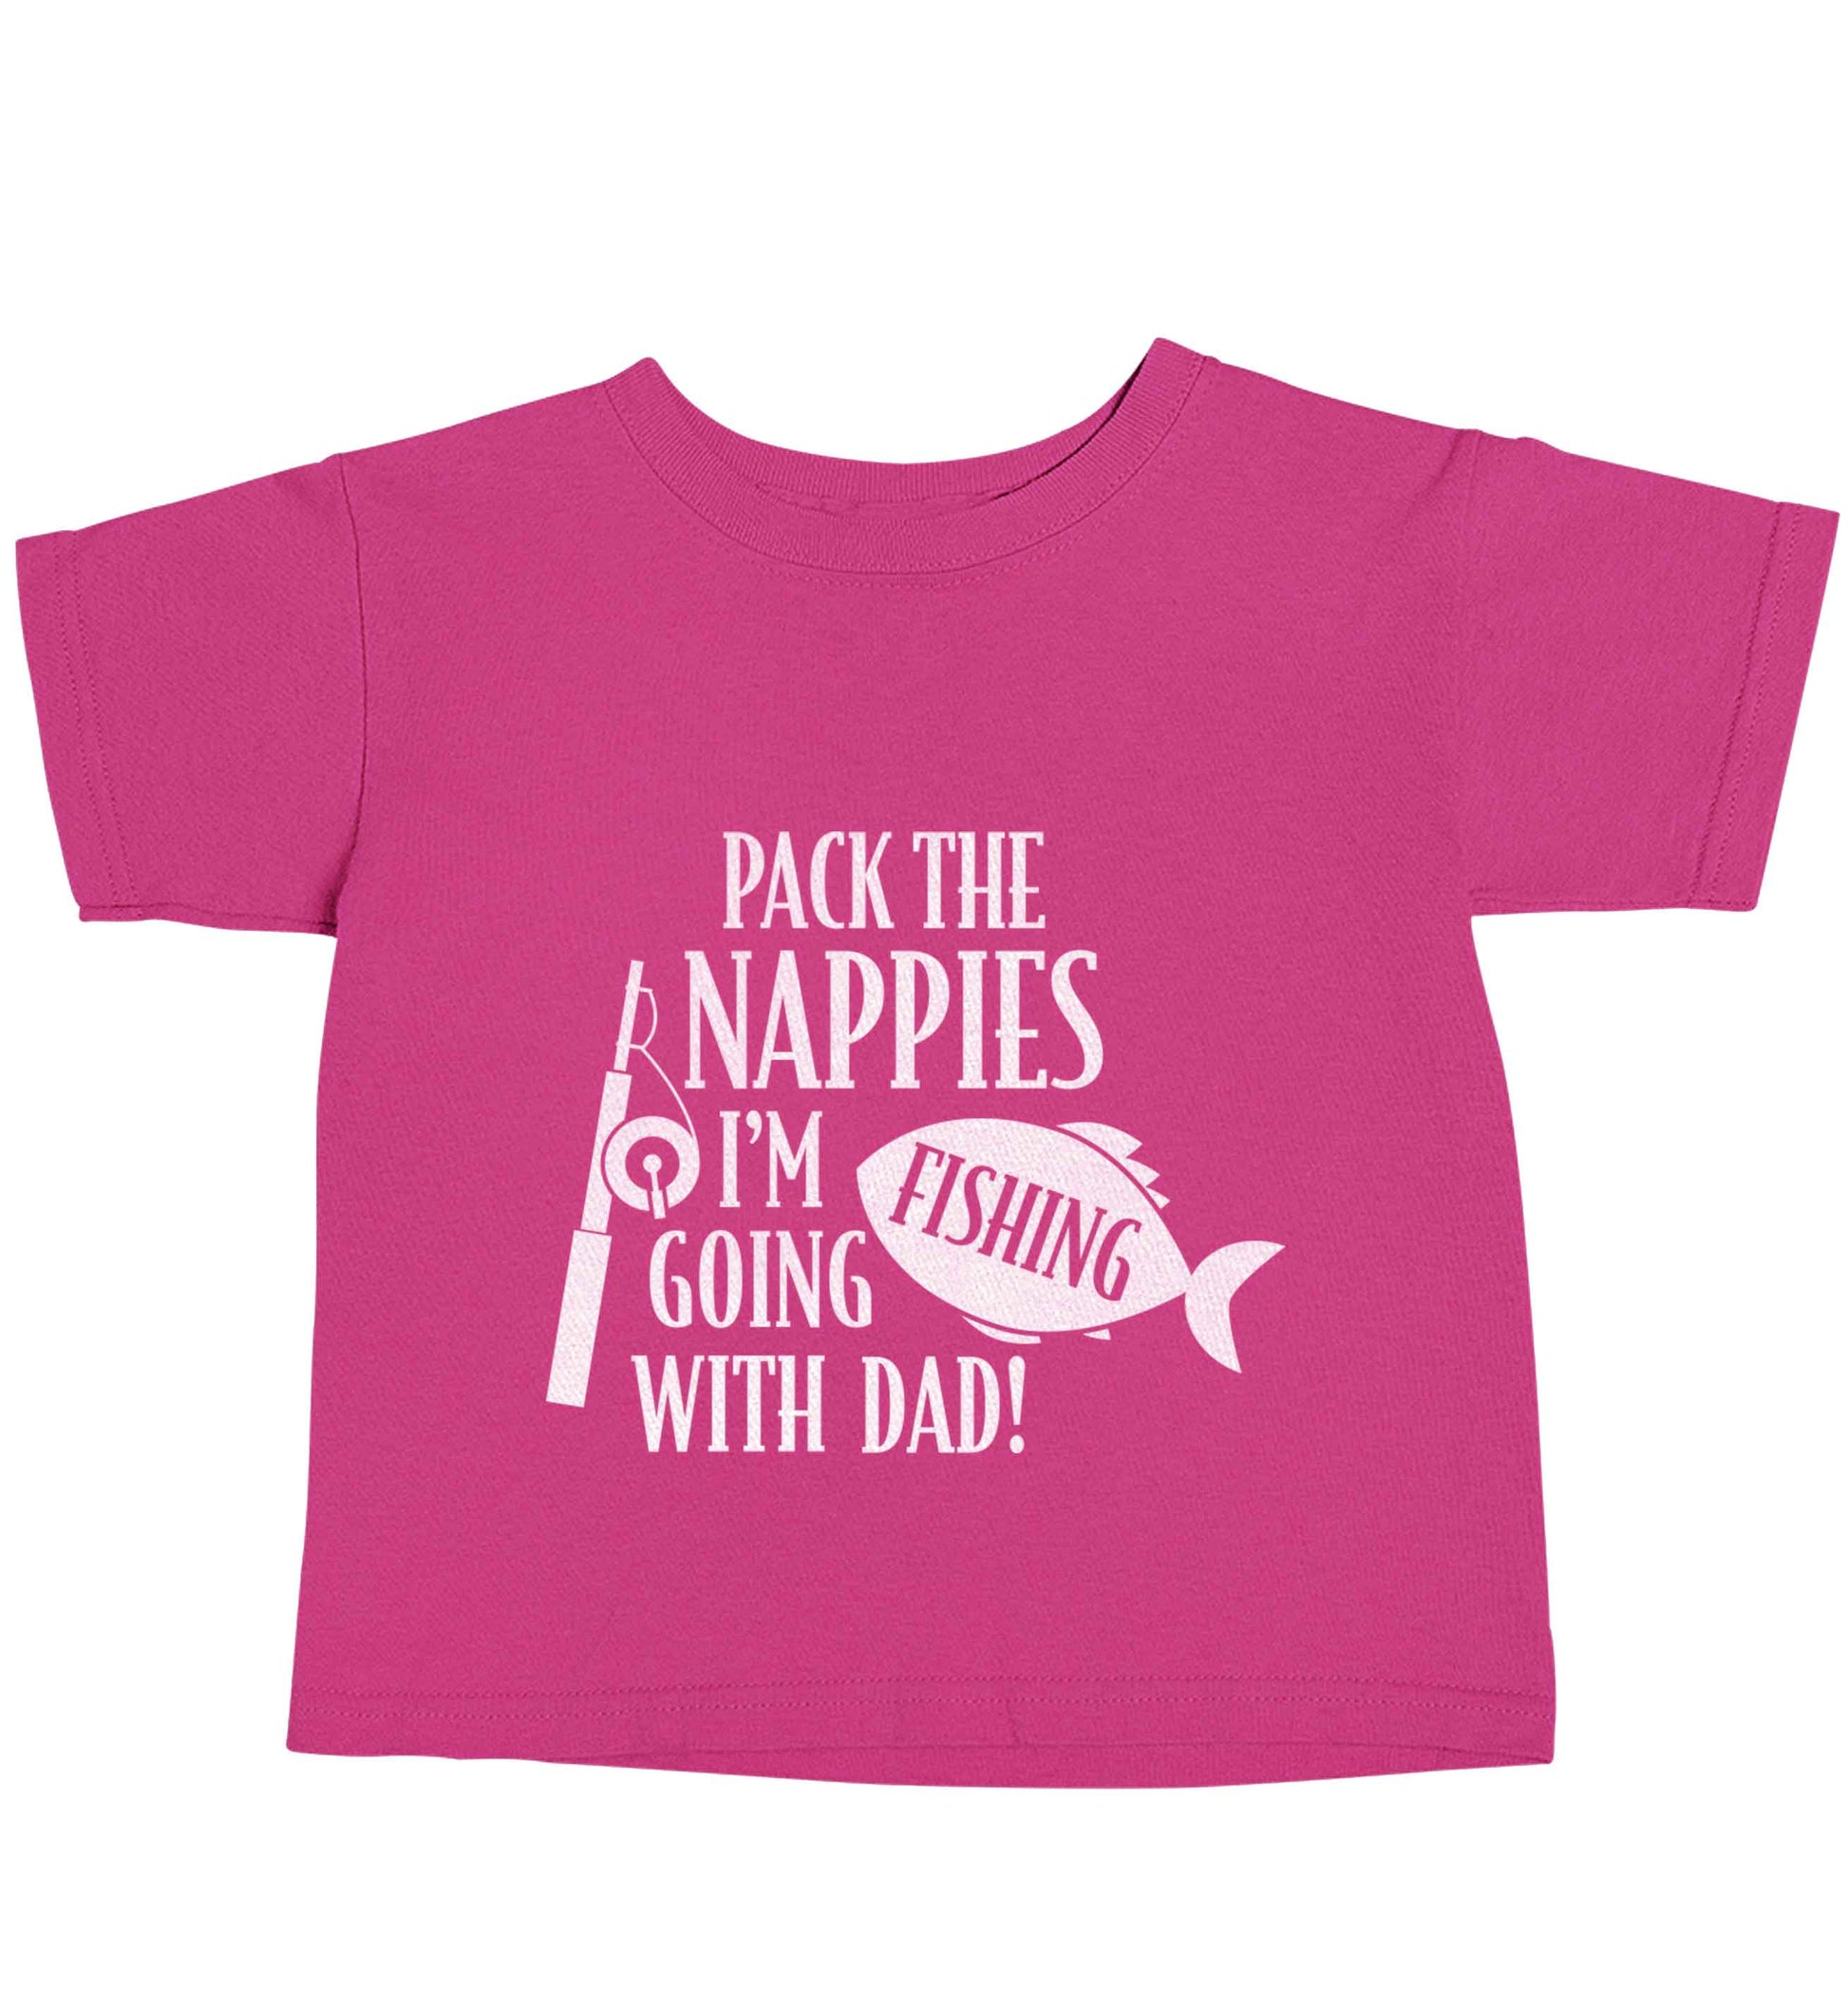 Pack the nappies I'm going fishing with Dad - baby toddler Tshirt